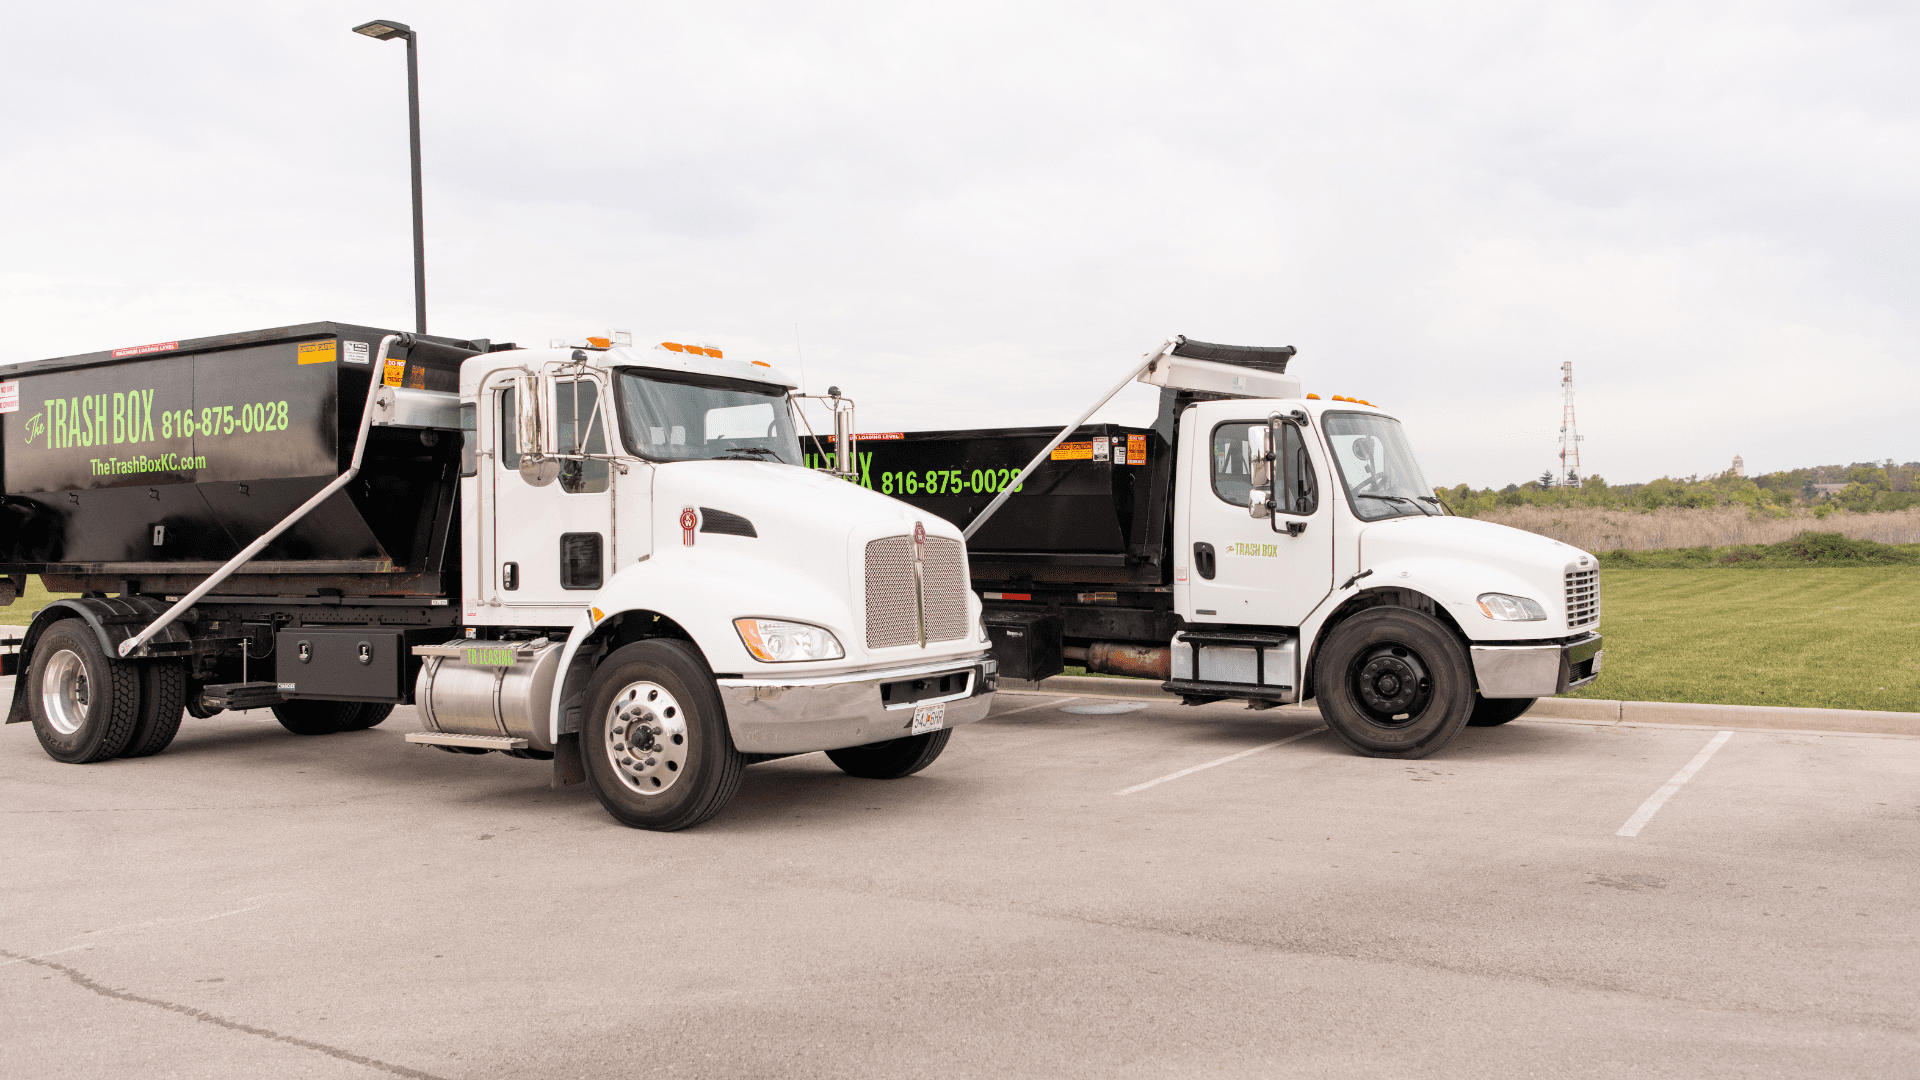 Need Dumpster Rental Services in Overland Park?